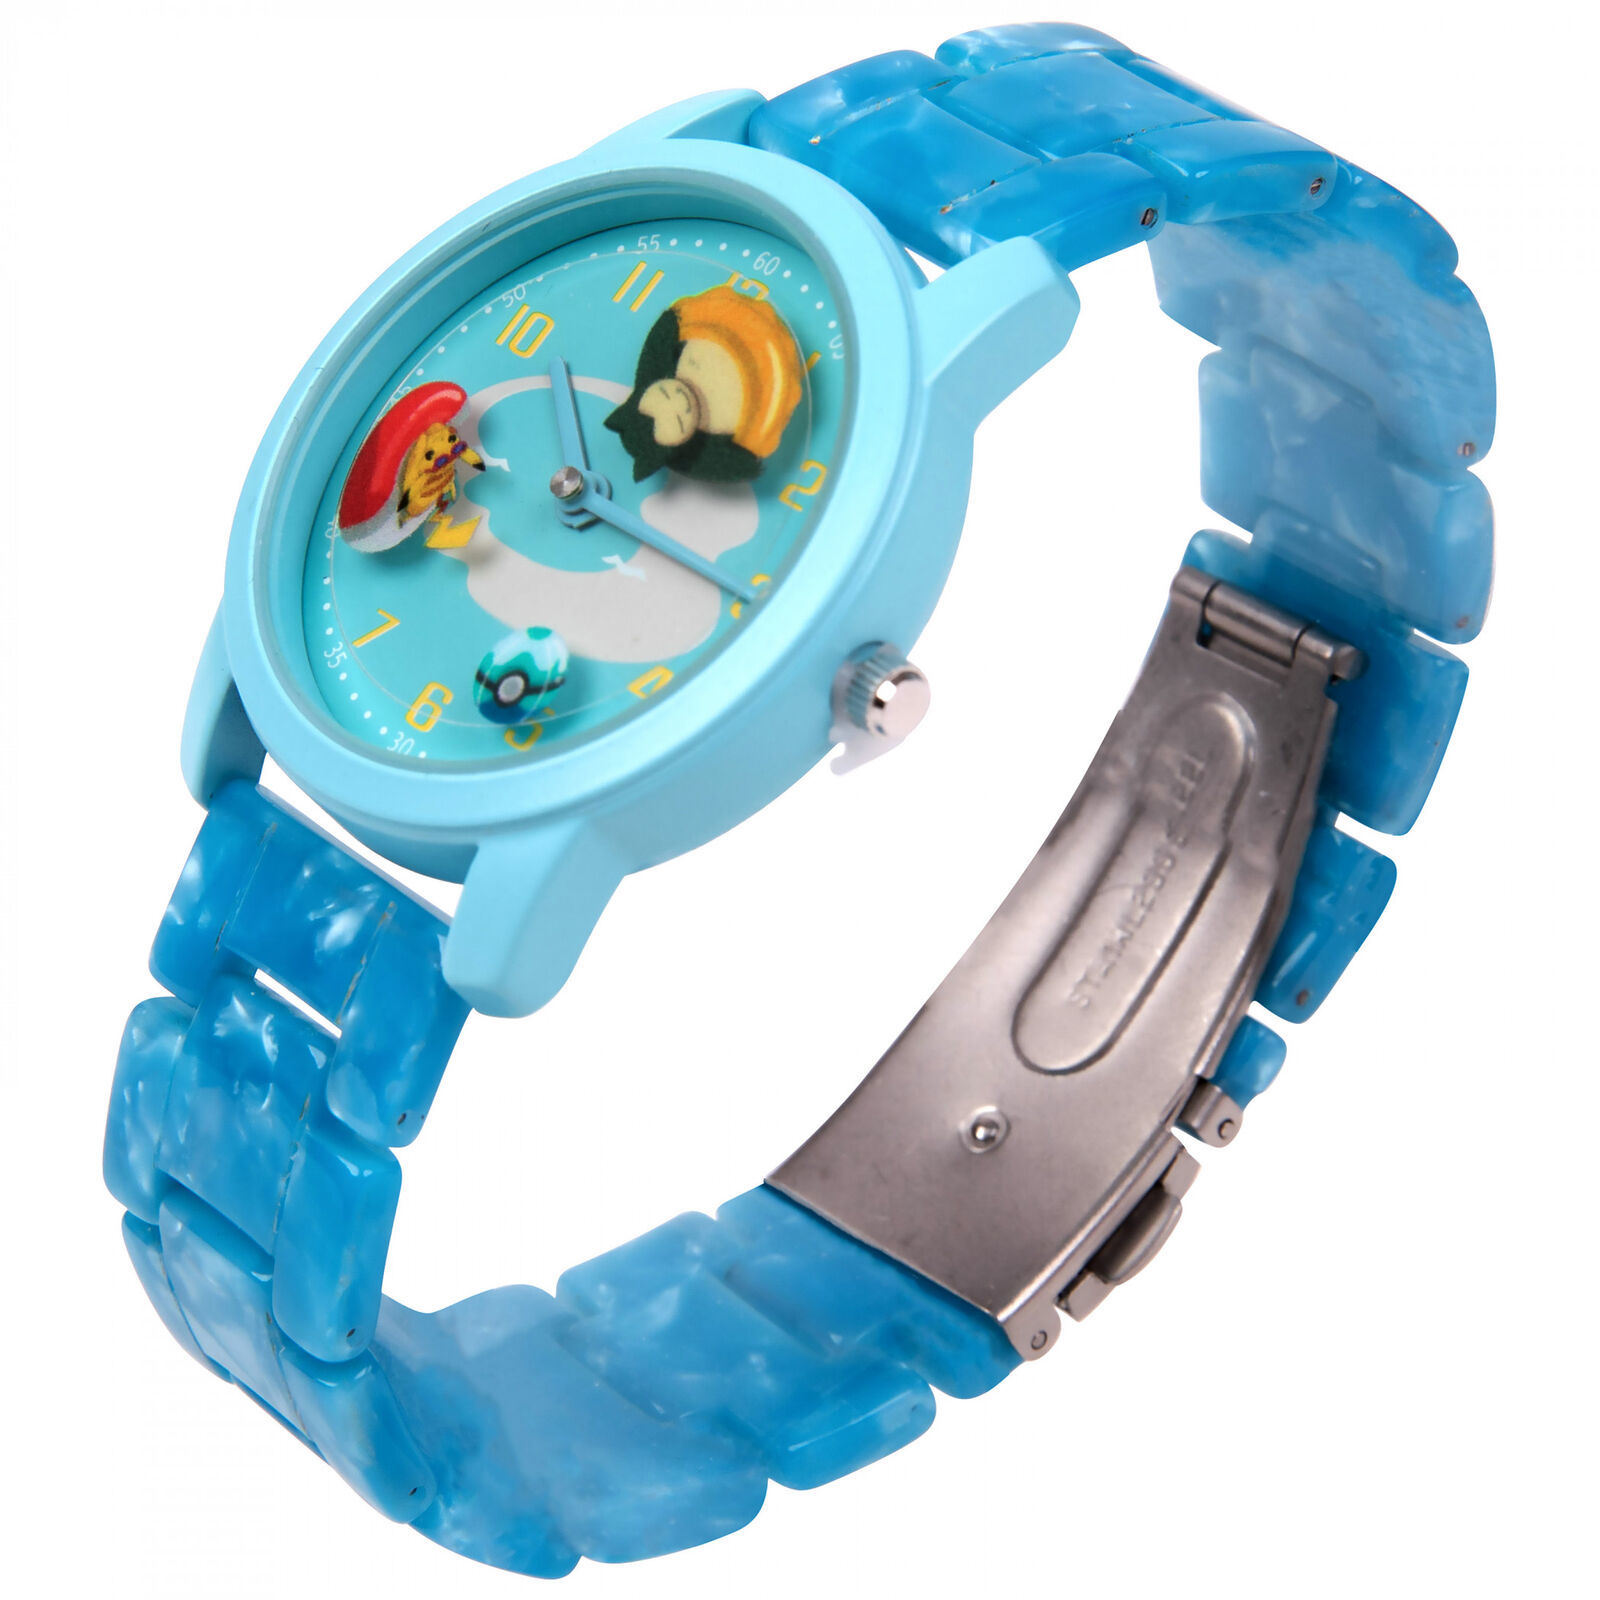 Pokemon Water Fun Time Watch with Rotating Watch Face Blue - $46.98